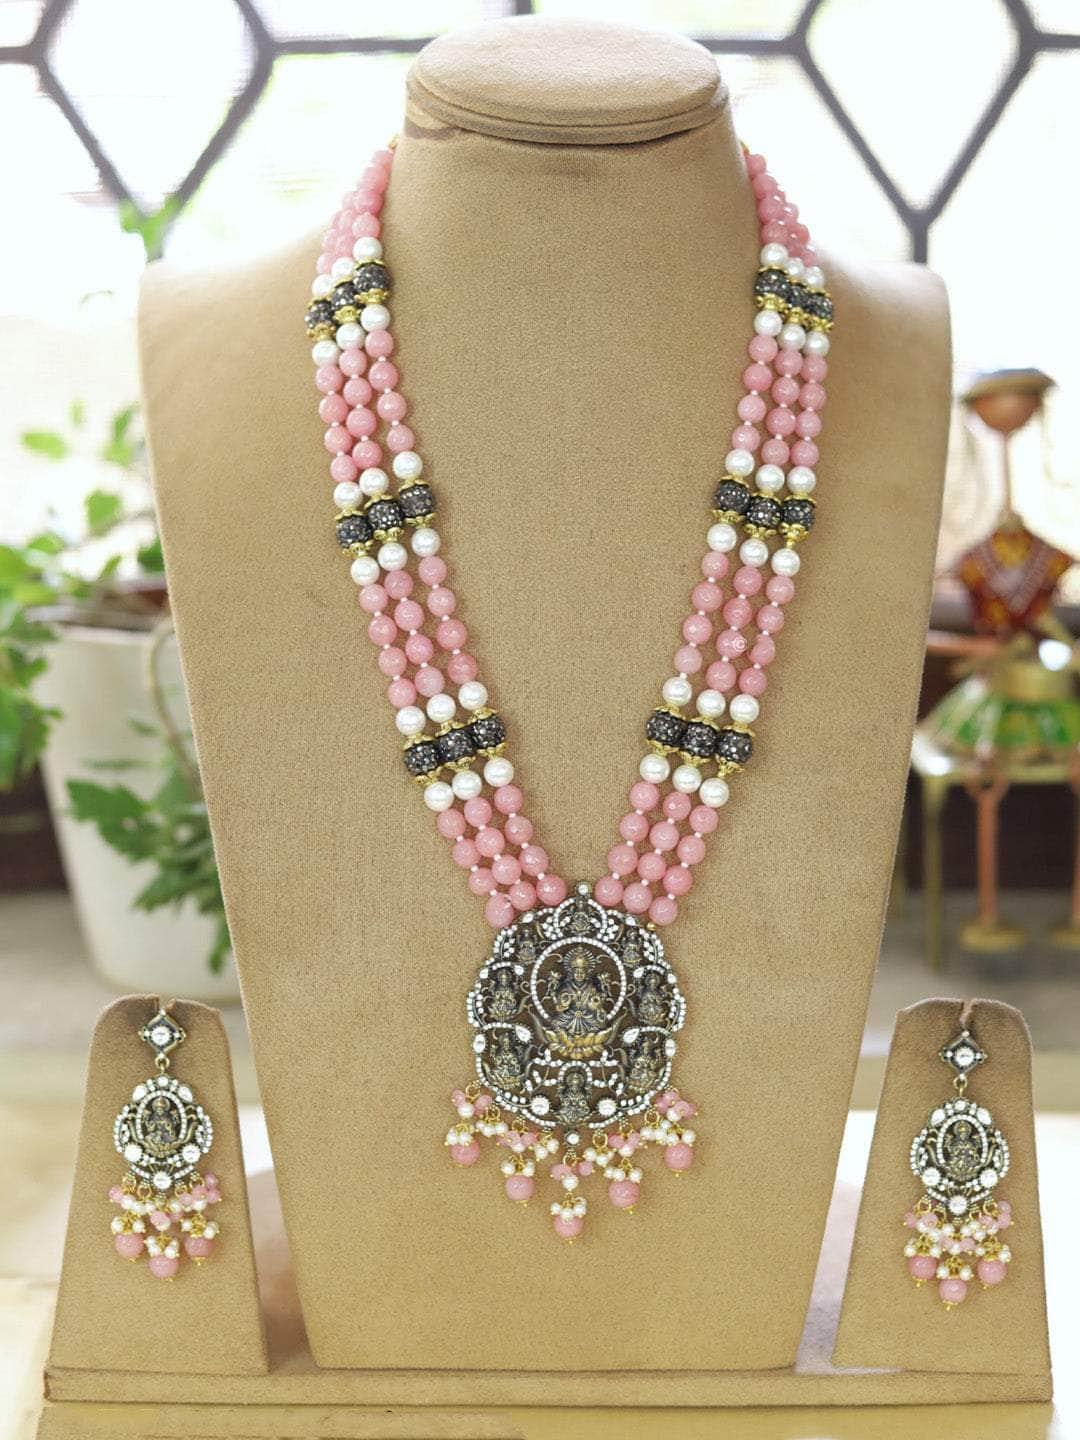 Ishhaara Hand Crafted Floral Pendant Necklace